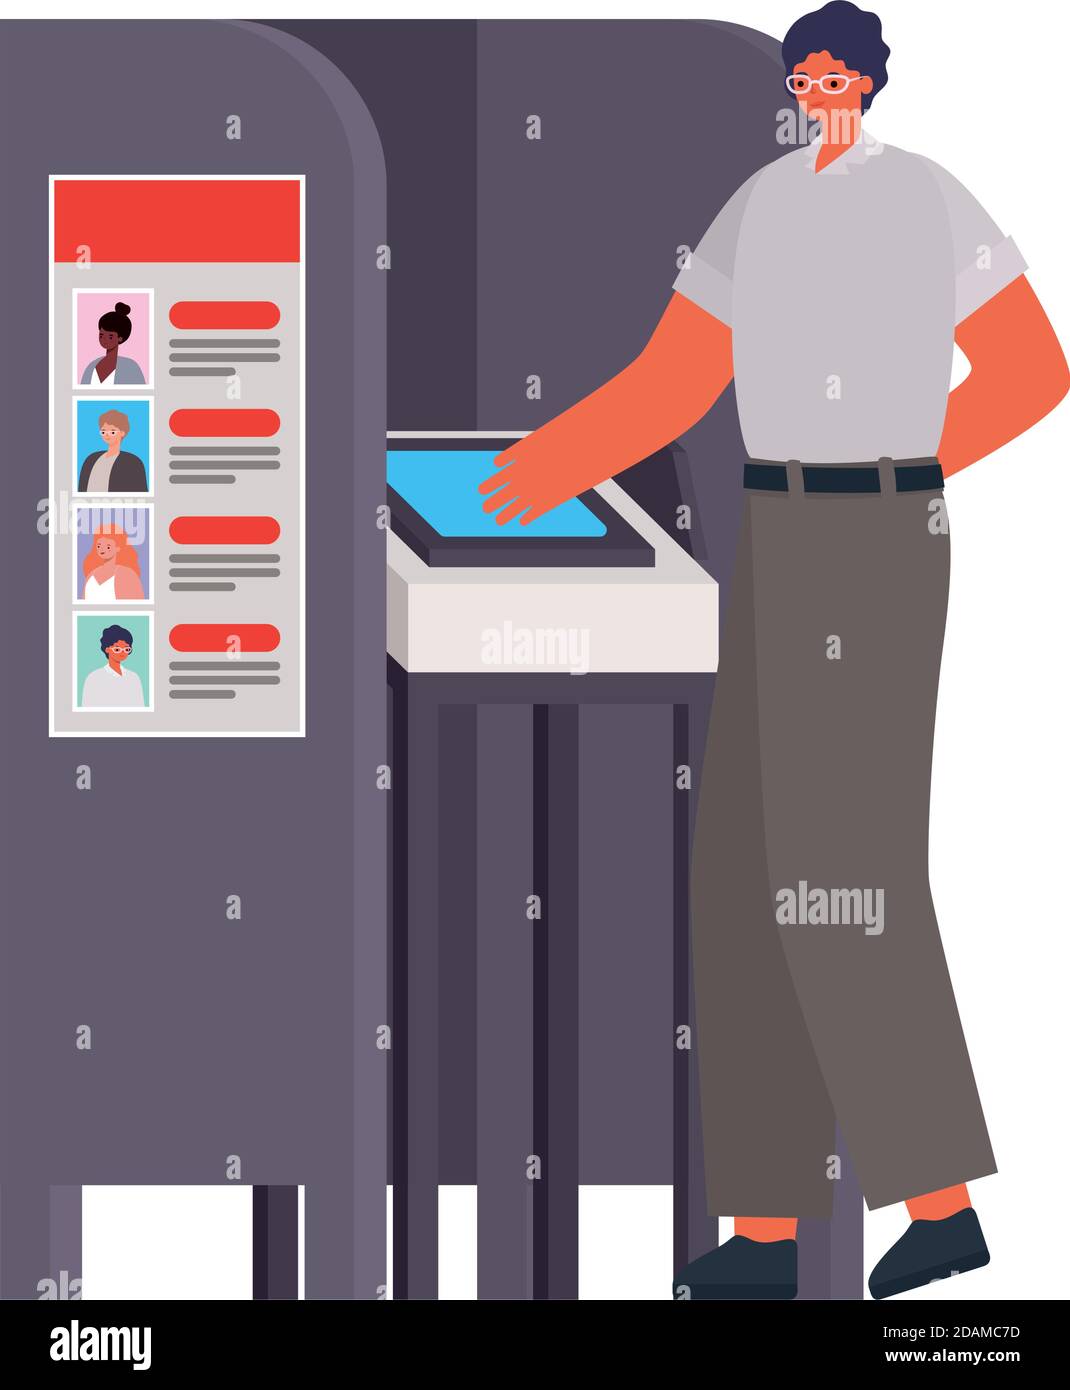 man voting with black hair and whithe shirt in gray voting booth Stock Vector